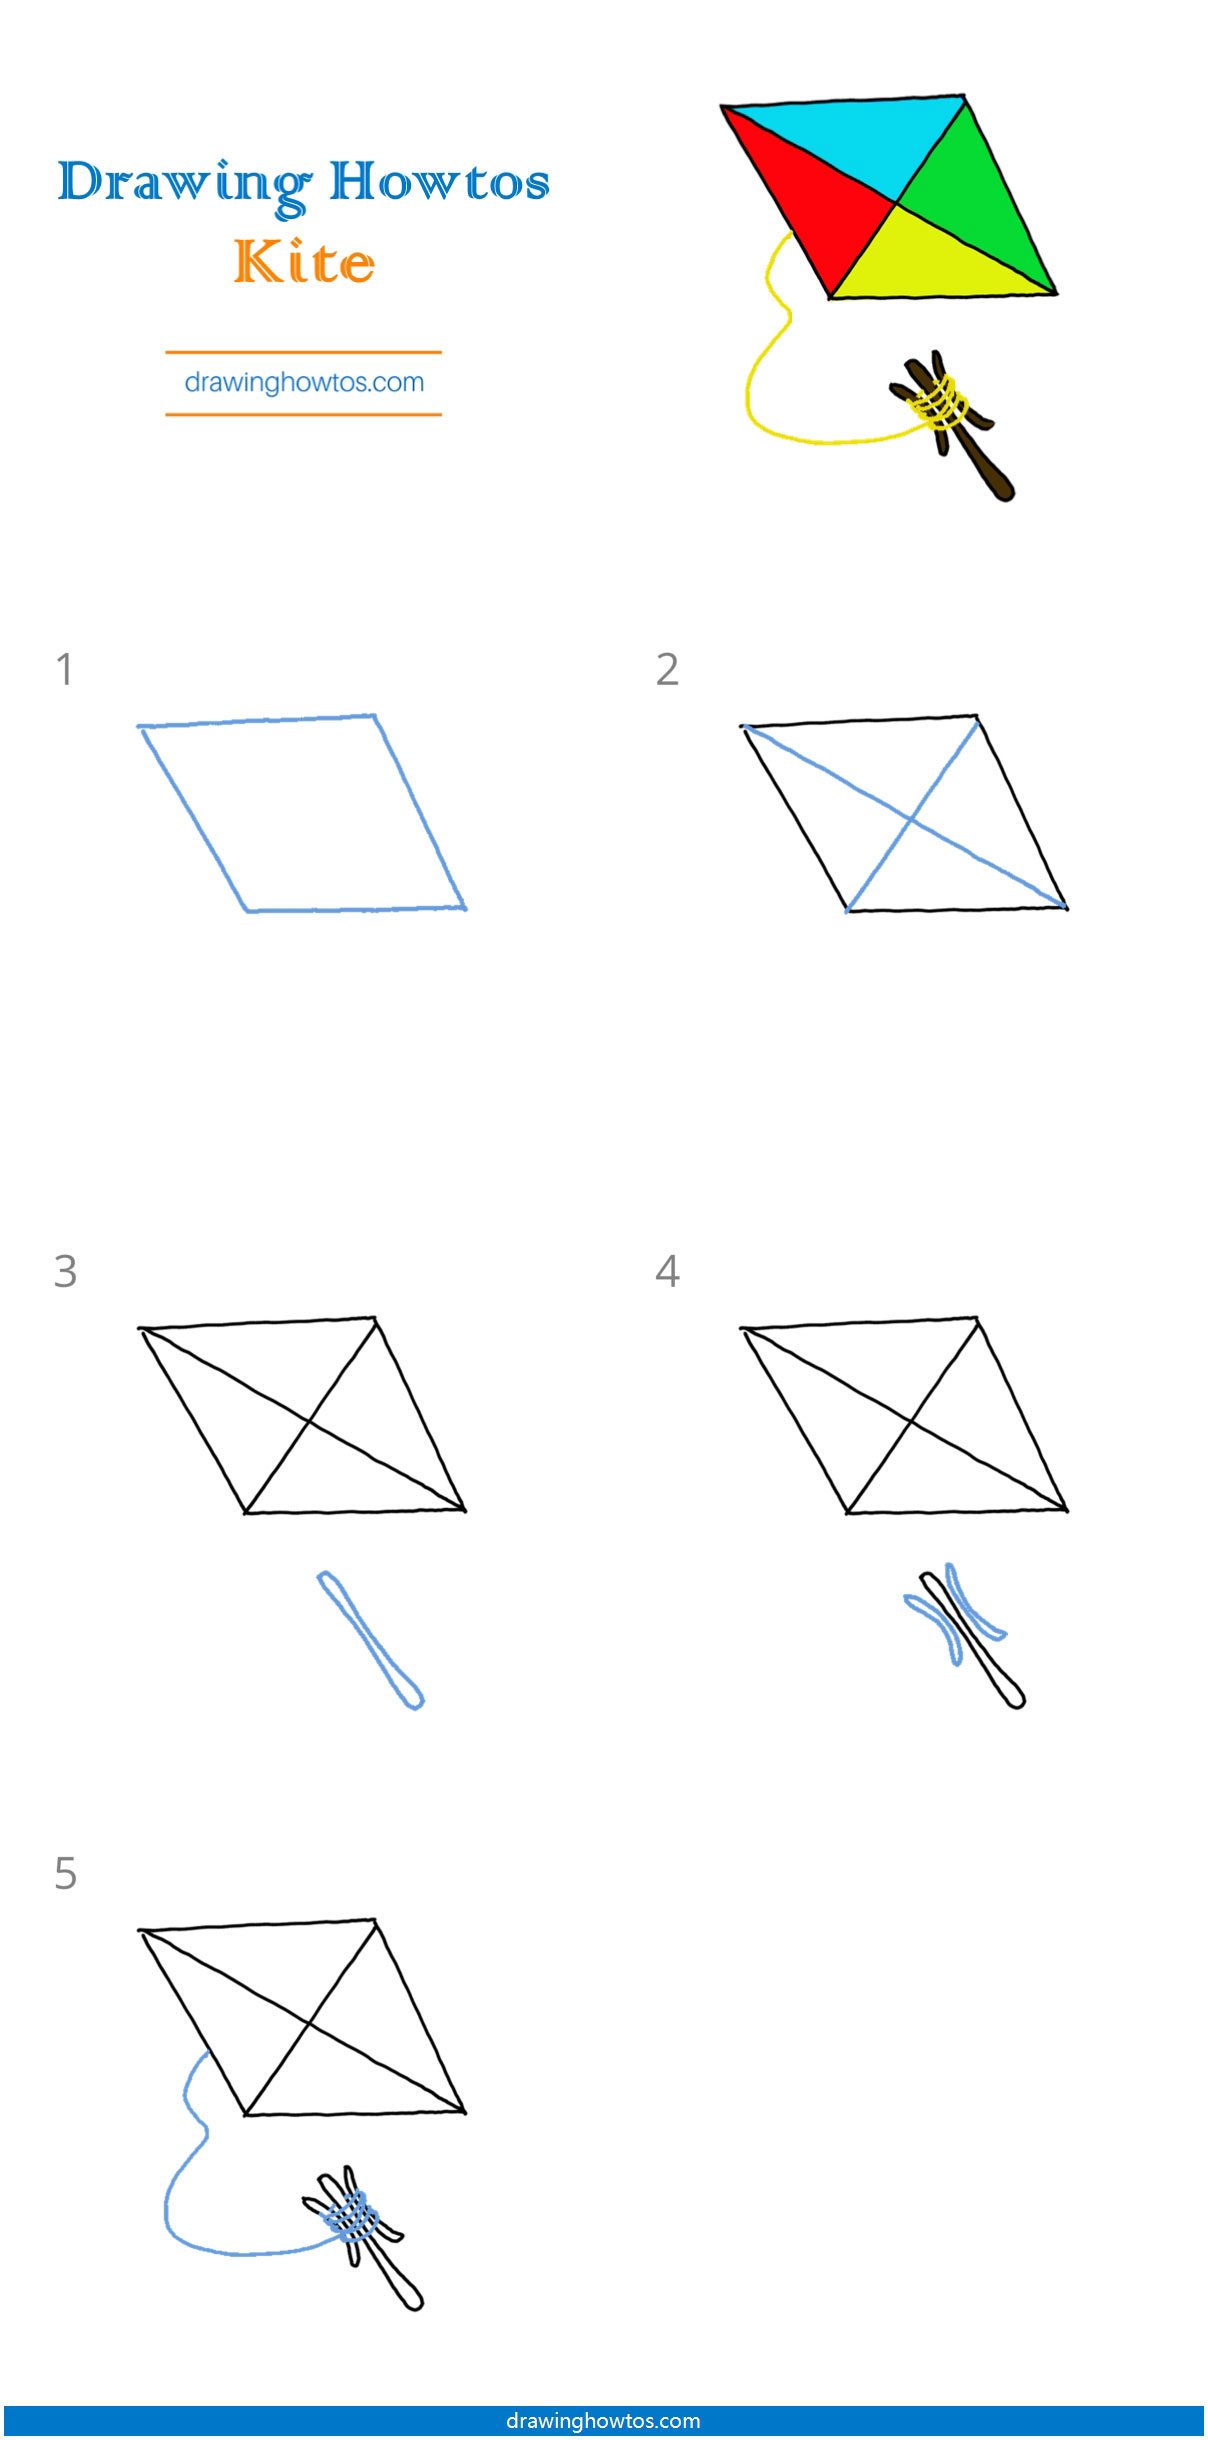 How to Draw a Kite Step by Step